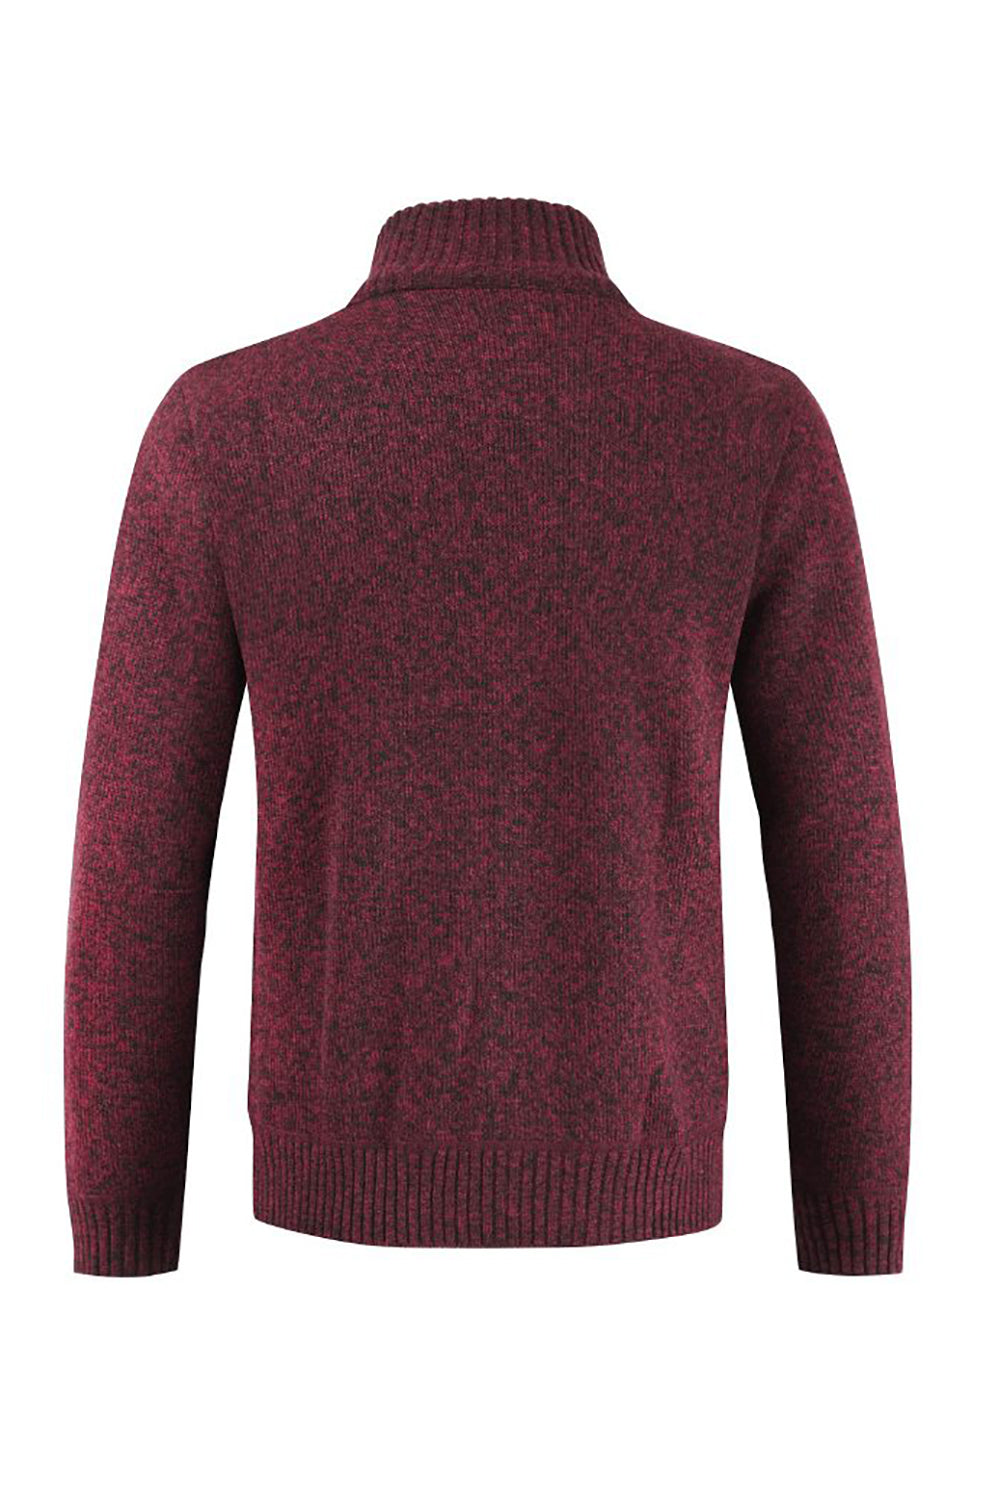 Burgundy Men's Casual Stand Collar Cardigan Zipper Cable Knitted Sweater